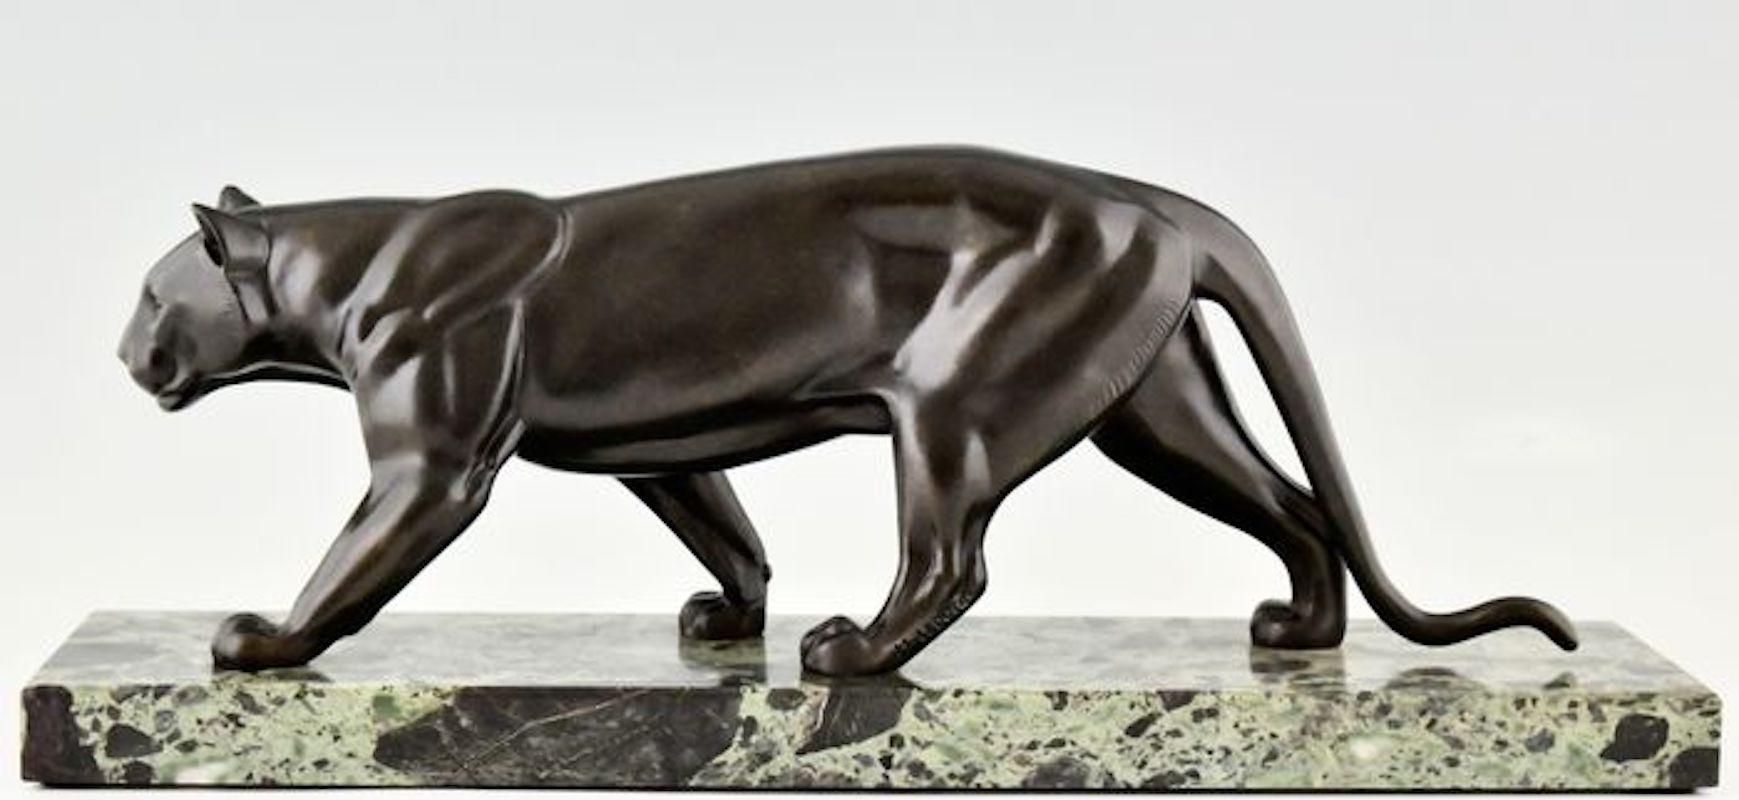 20th Century Art Deco Black Lacquer Panther Sculpture on Marble Base Signed M. Leducq